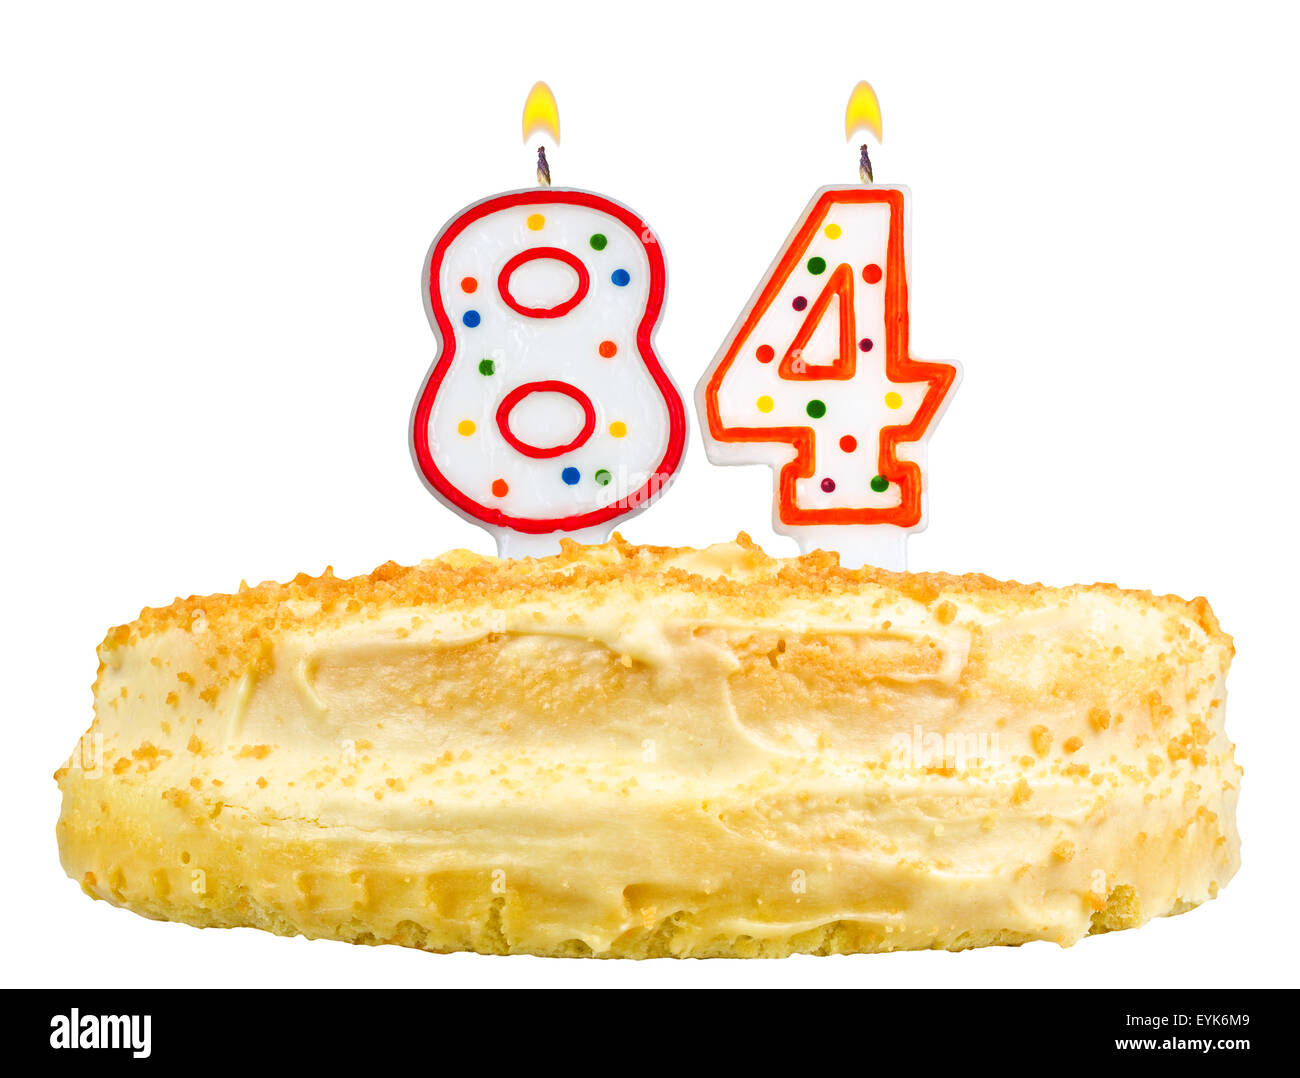 birthday cake with candles number eighty four isolated on white background Stock Photo